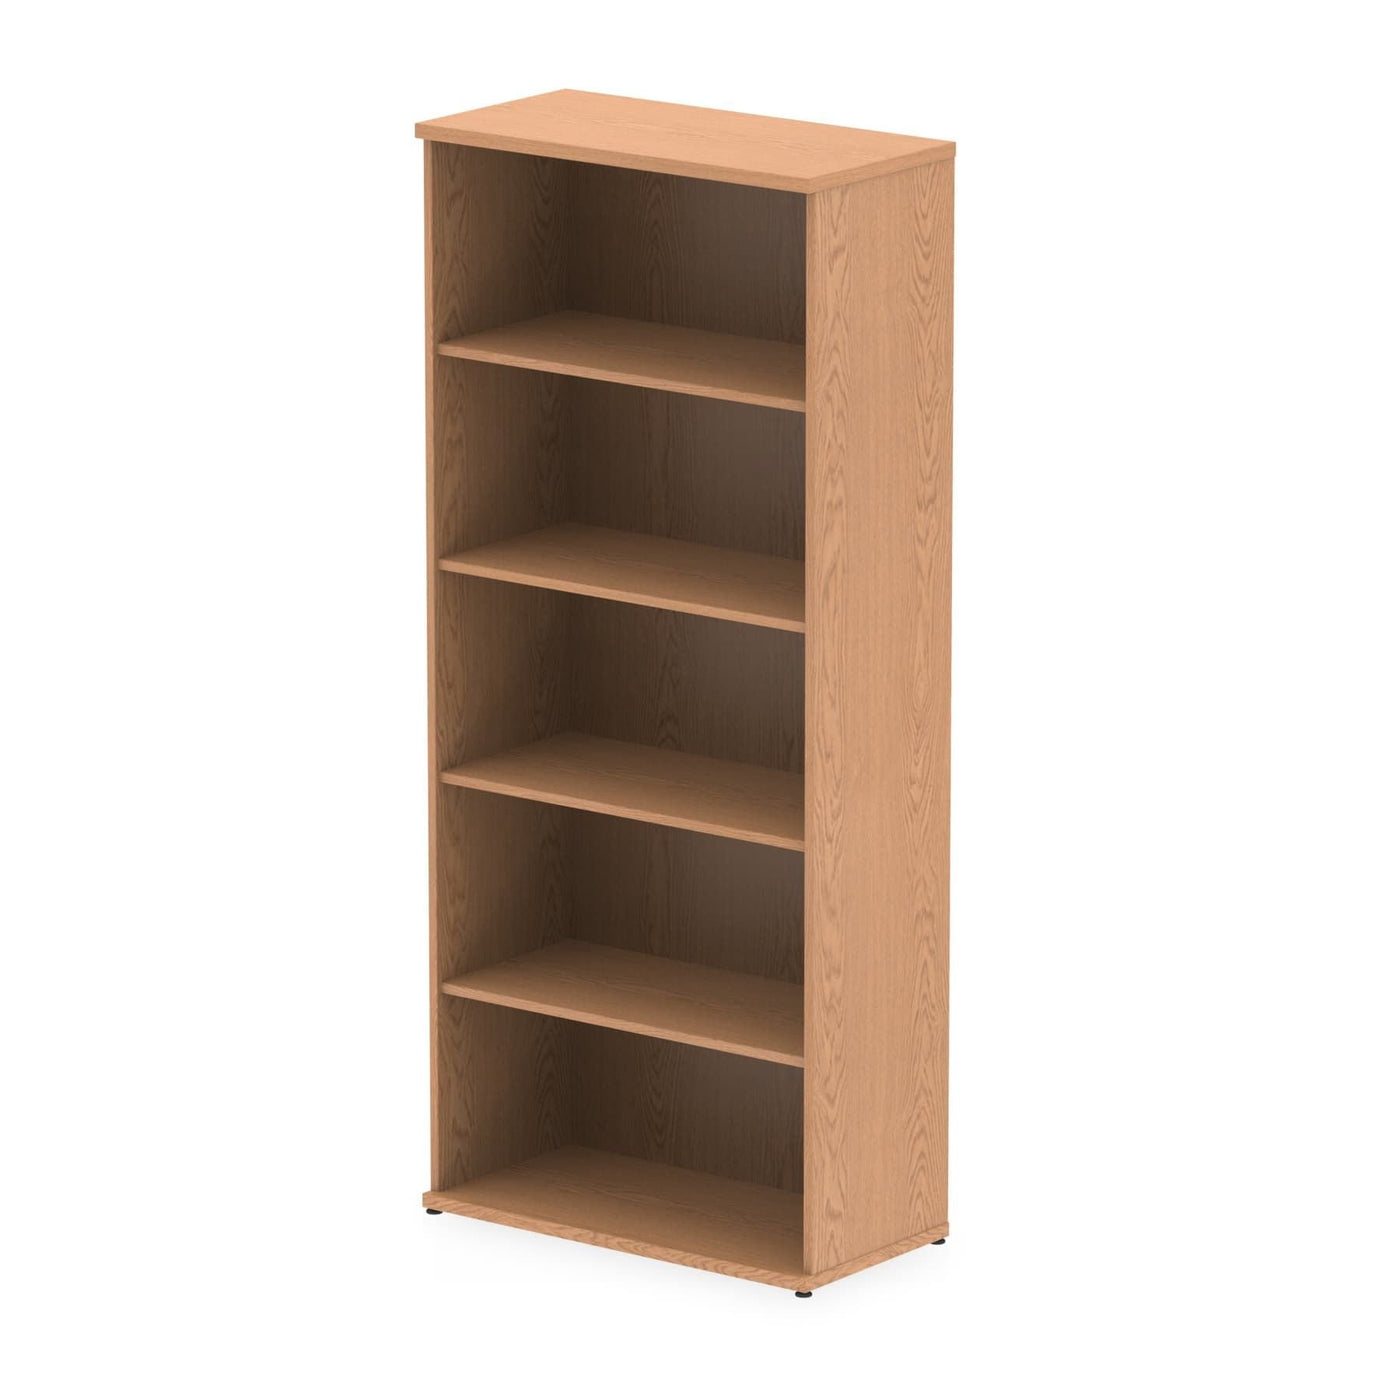 Impulse Bookcase | Home Storage | Home Office Furnitire | Bookcase | Storage and Organisation | Bookcase for home use | Work from home